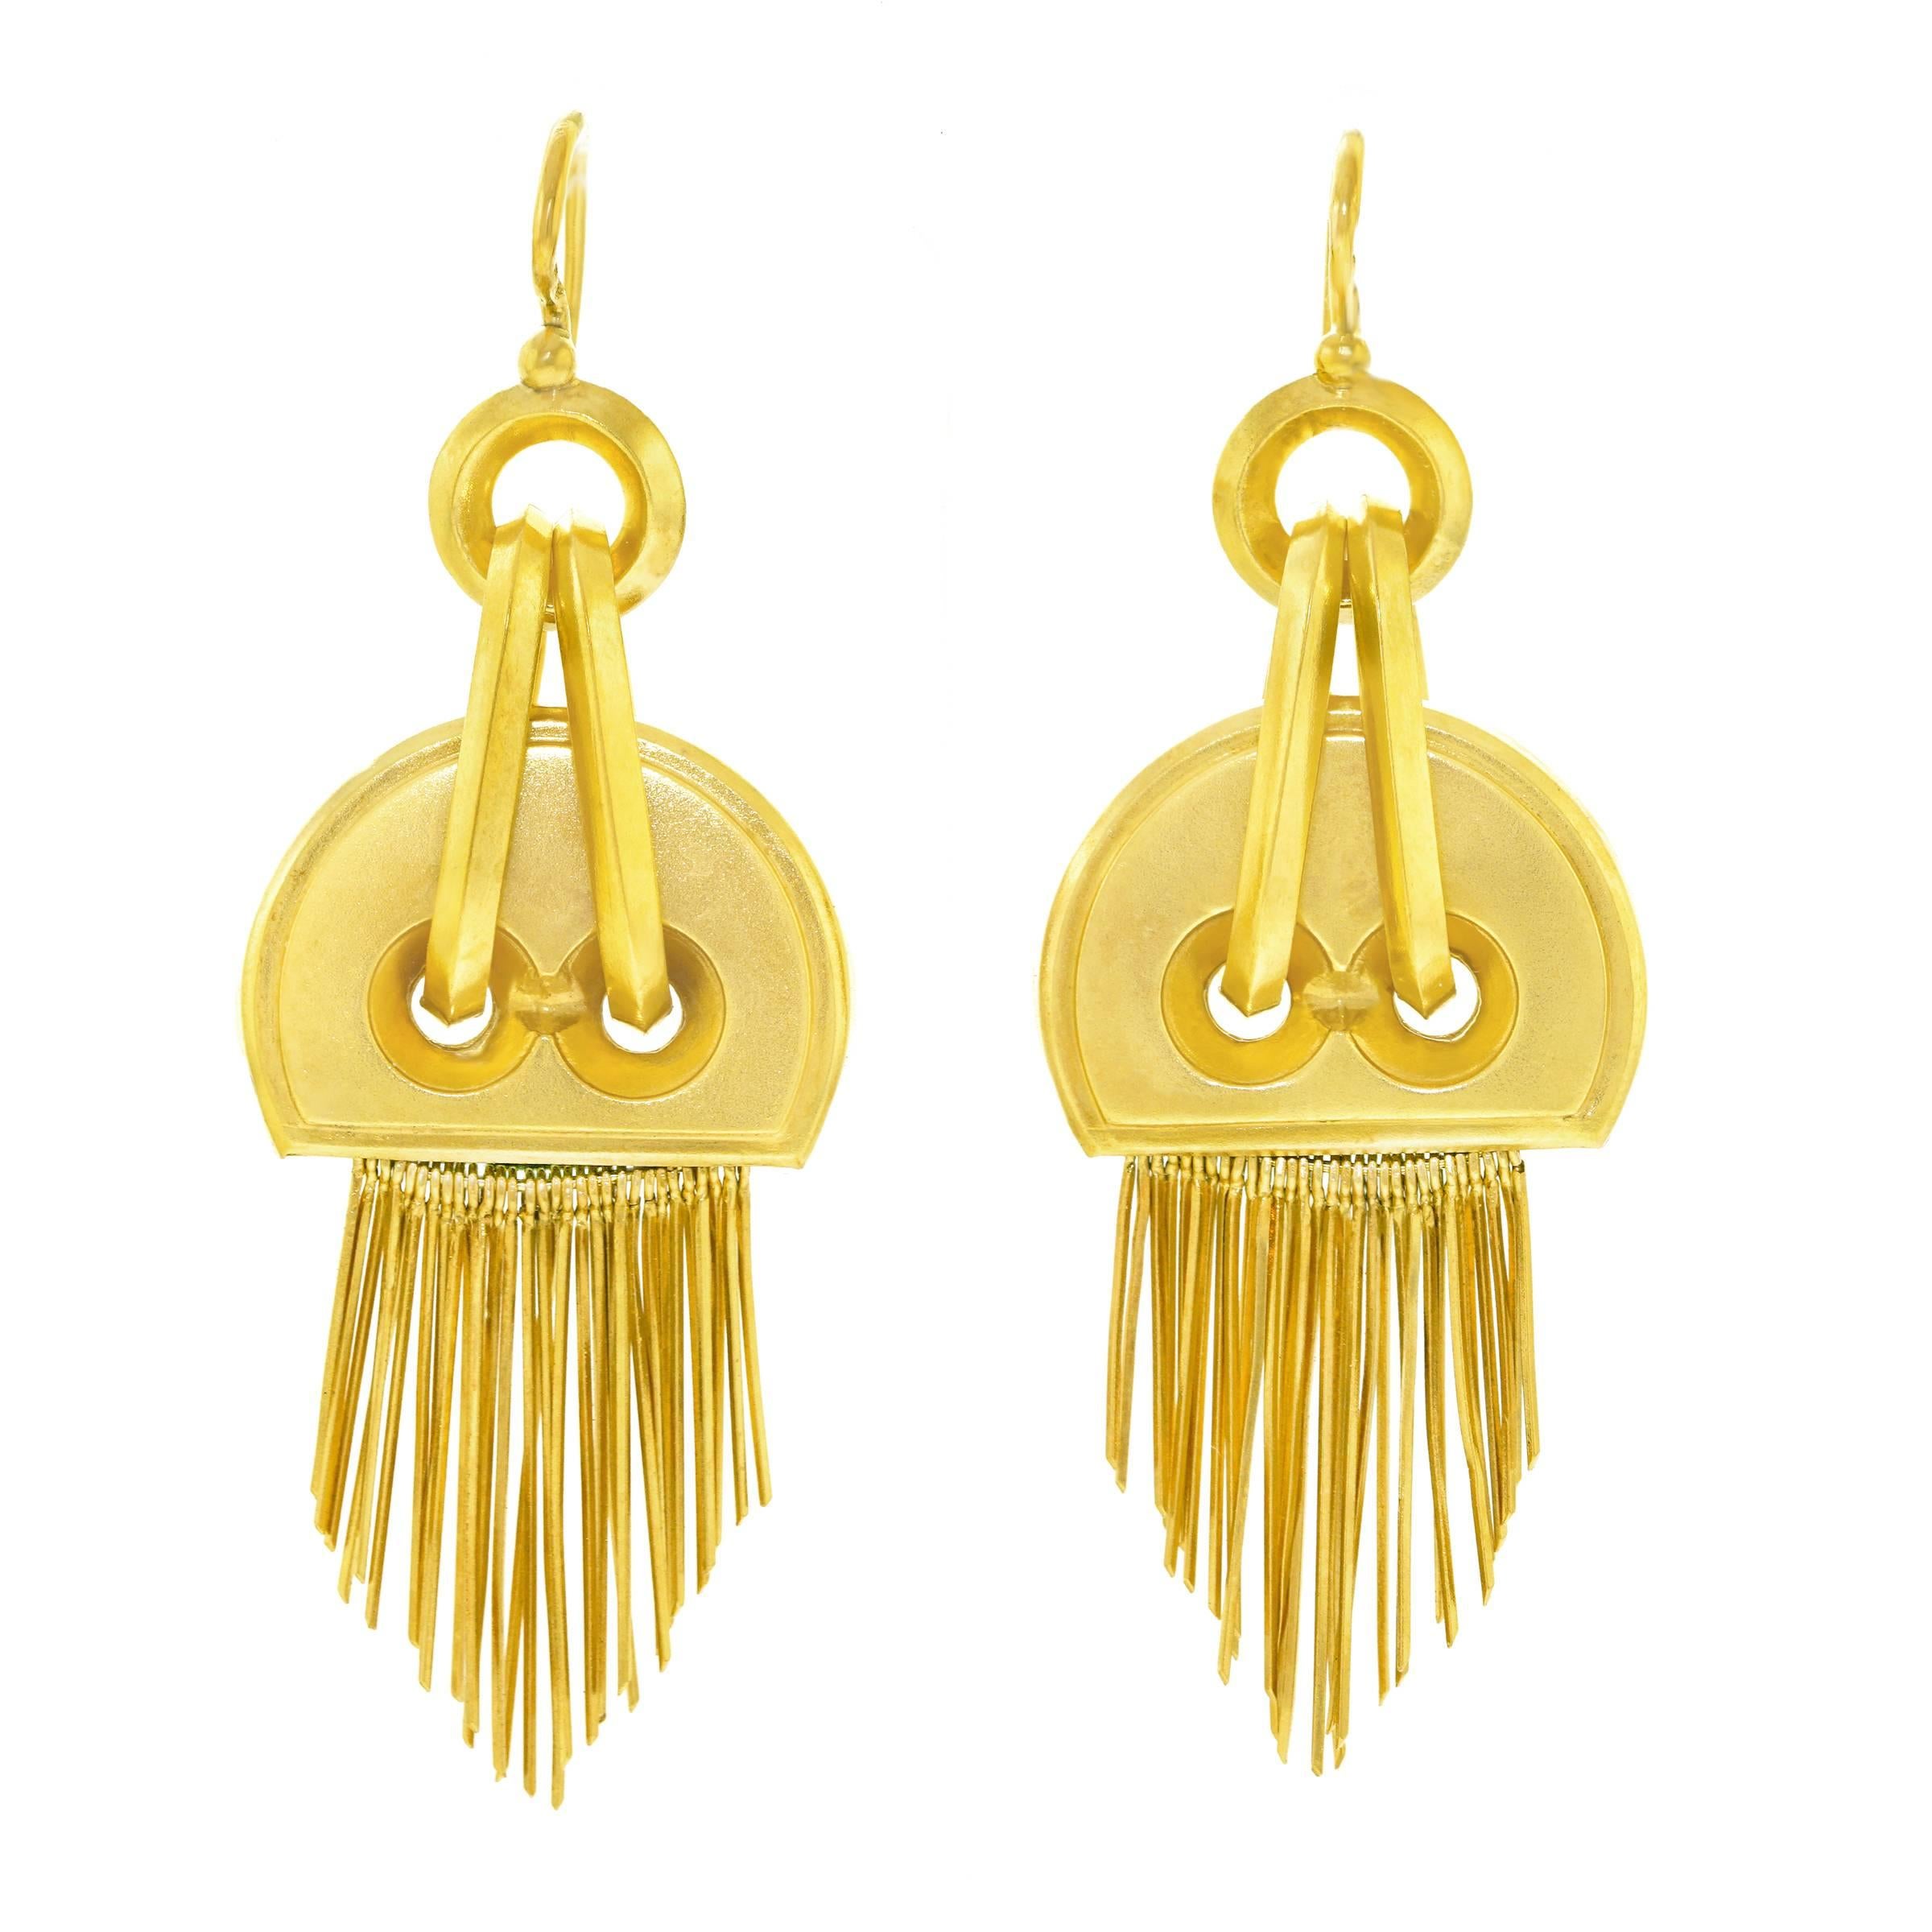 Antique French Gold Chandelier Earrings